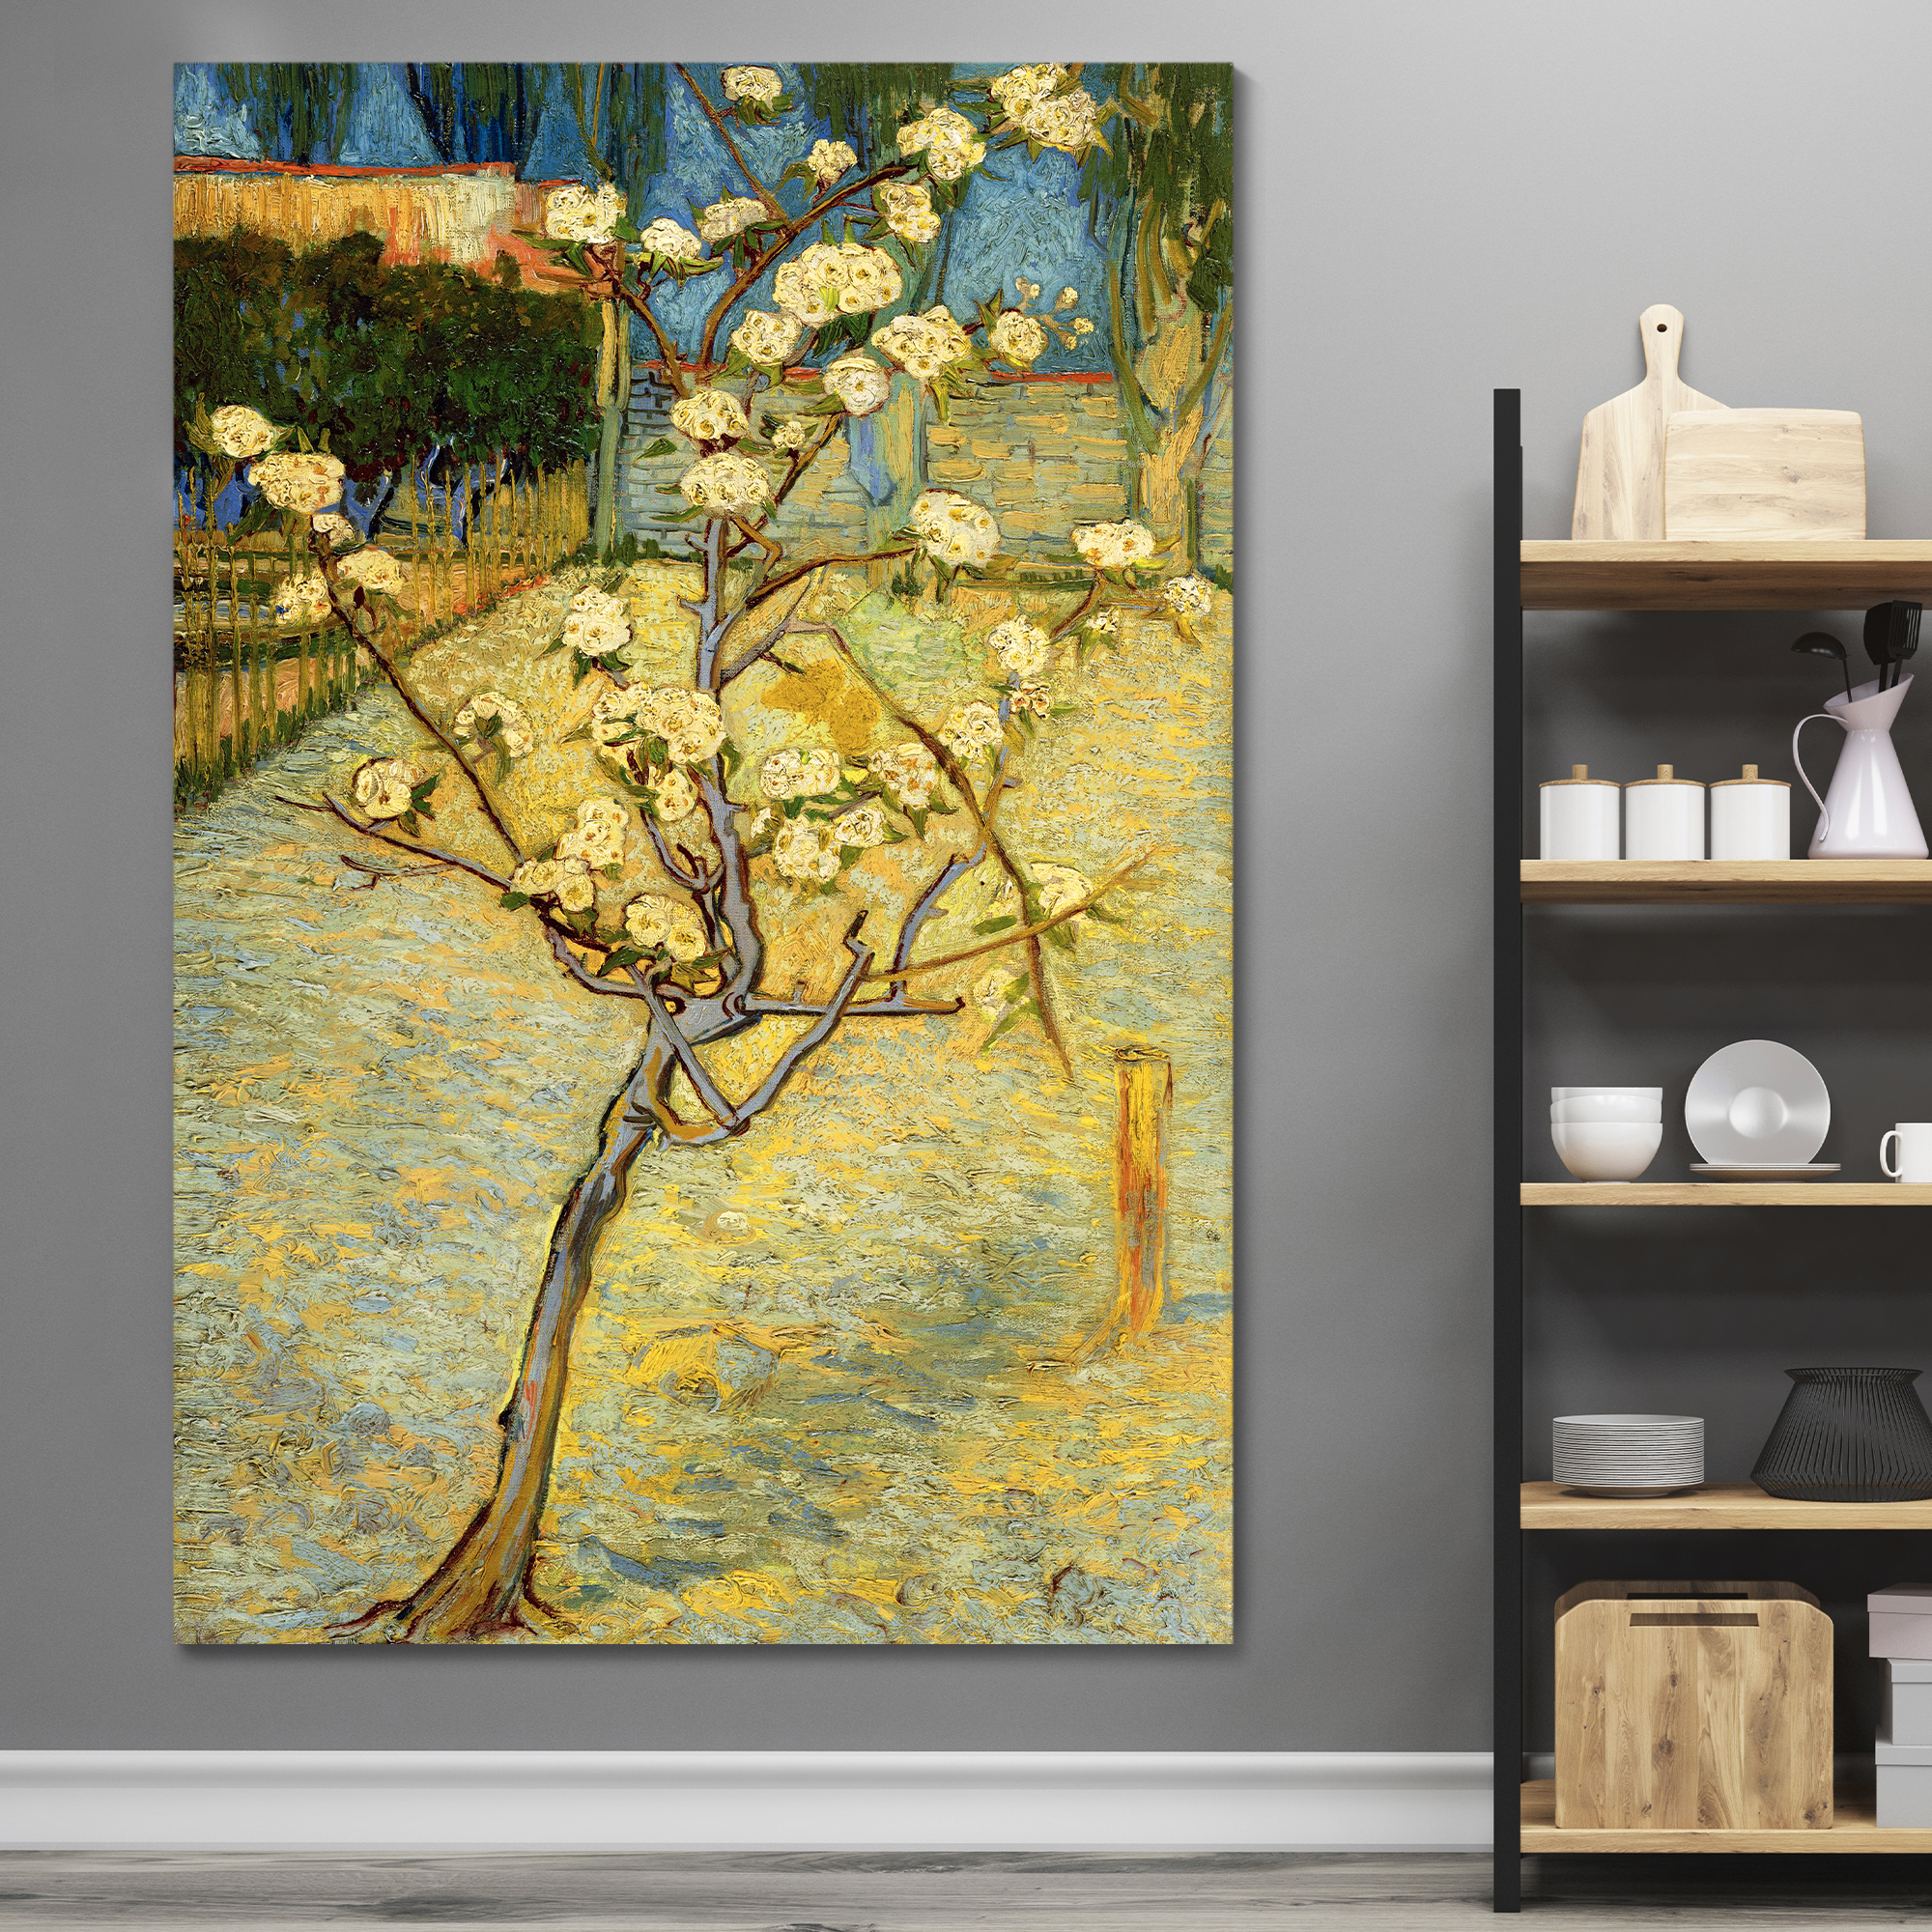 Small Pear Tree in Blossom by Vincent Van Gogh - Canvas Print Wall Art Famous Oil Painting Reproduction - 12